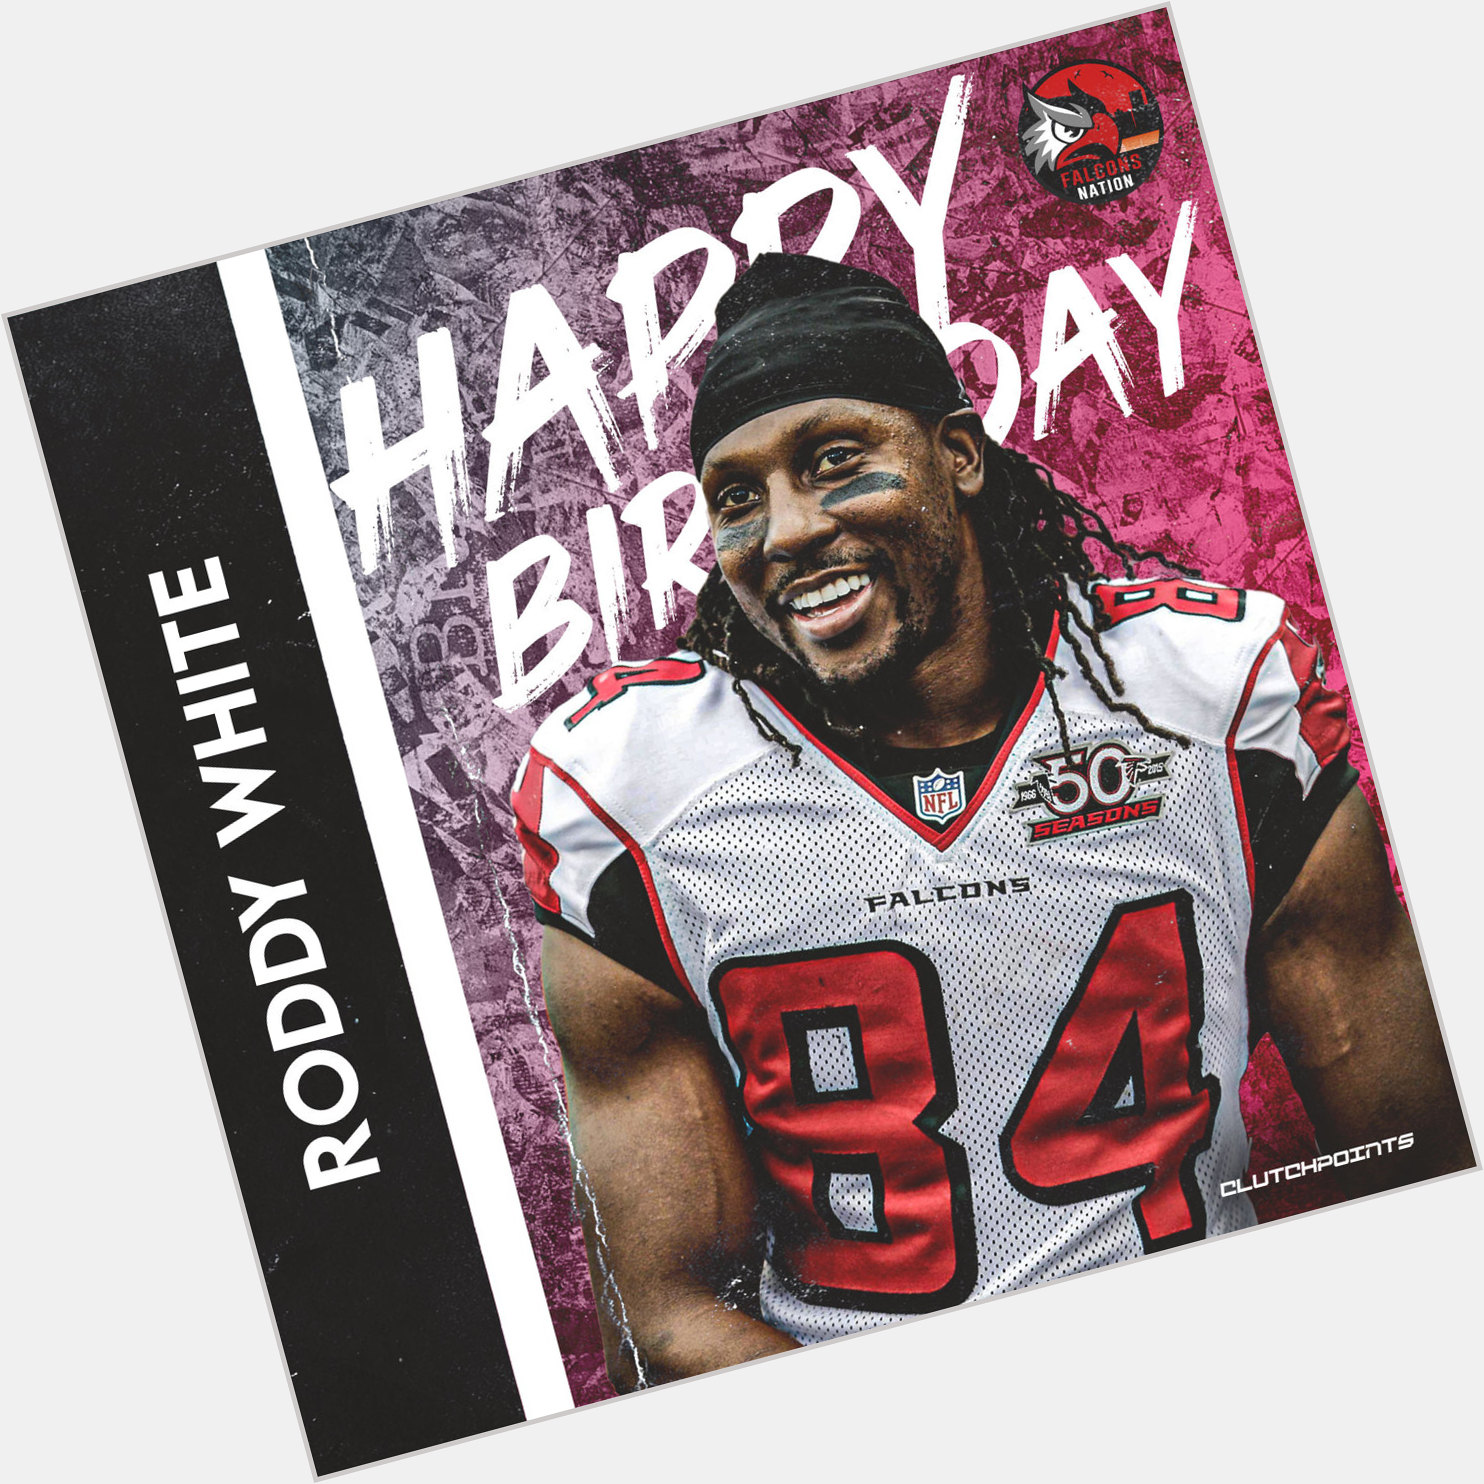 Join Falcons Nation in wishing ProBowler Roddy White a happy 40th birthday!  